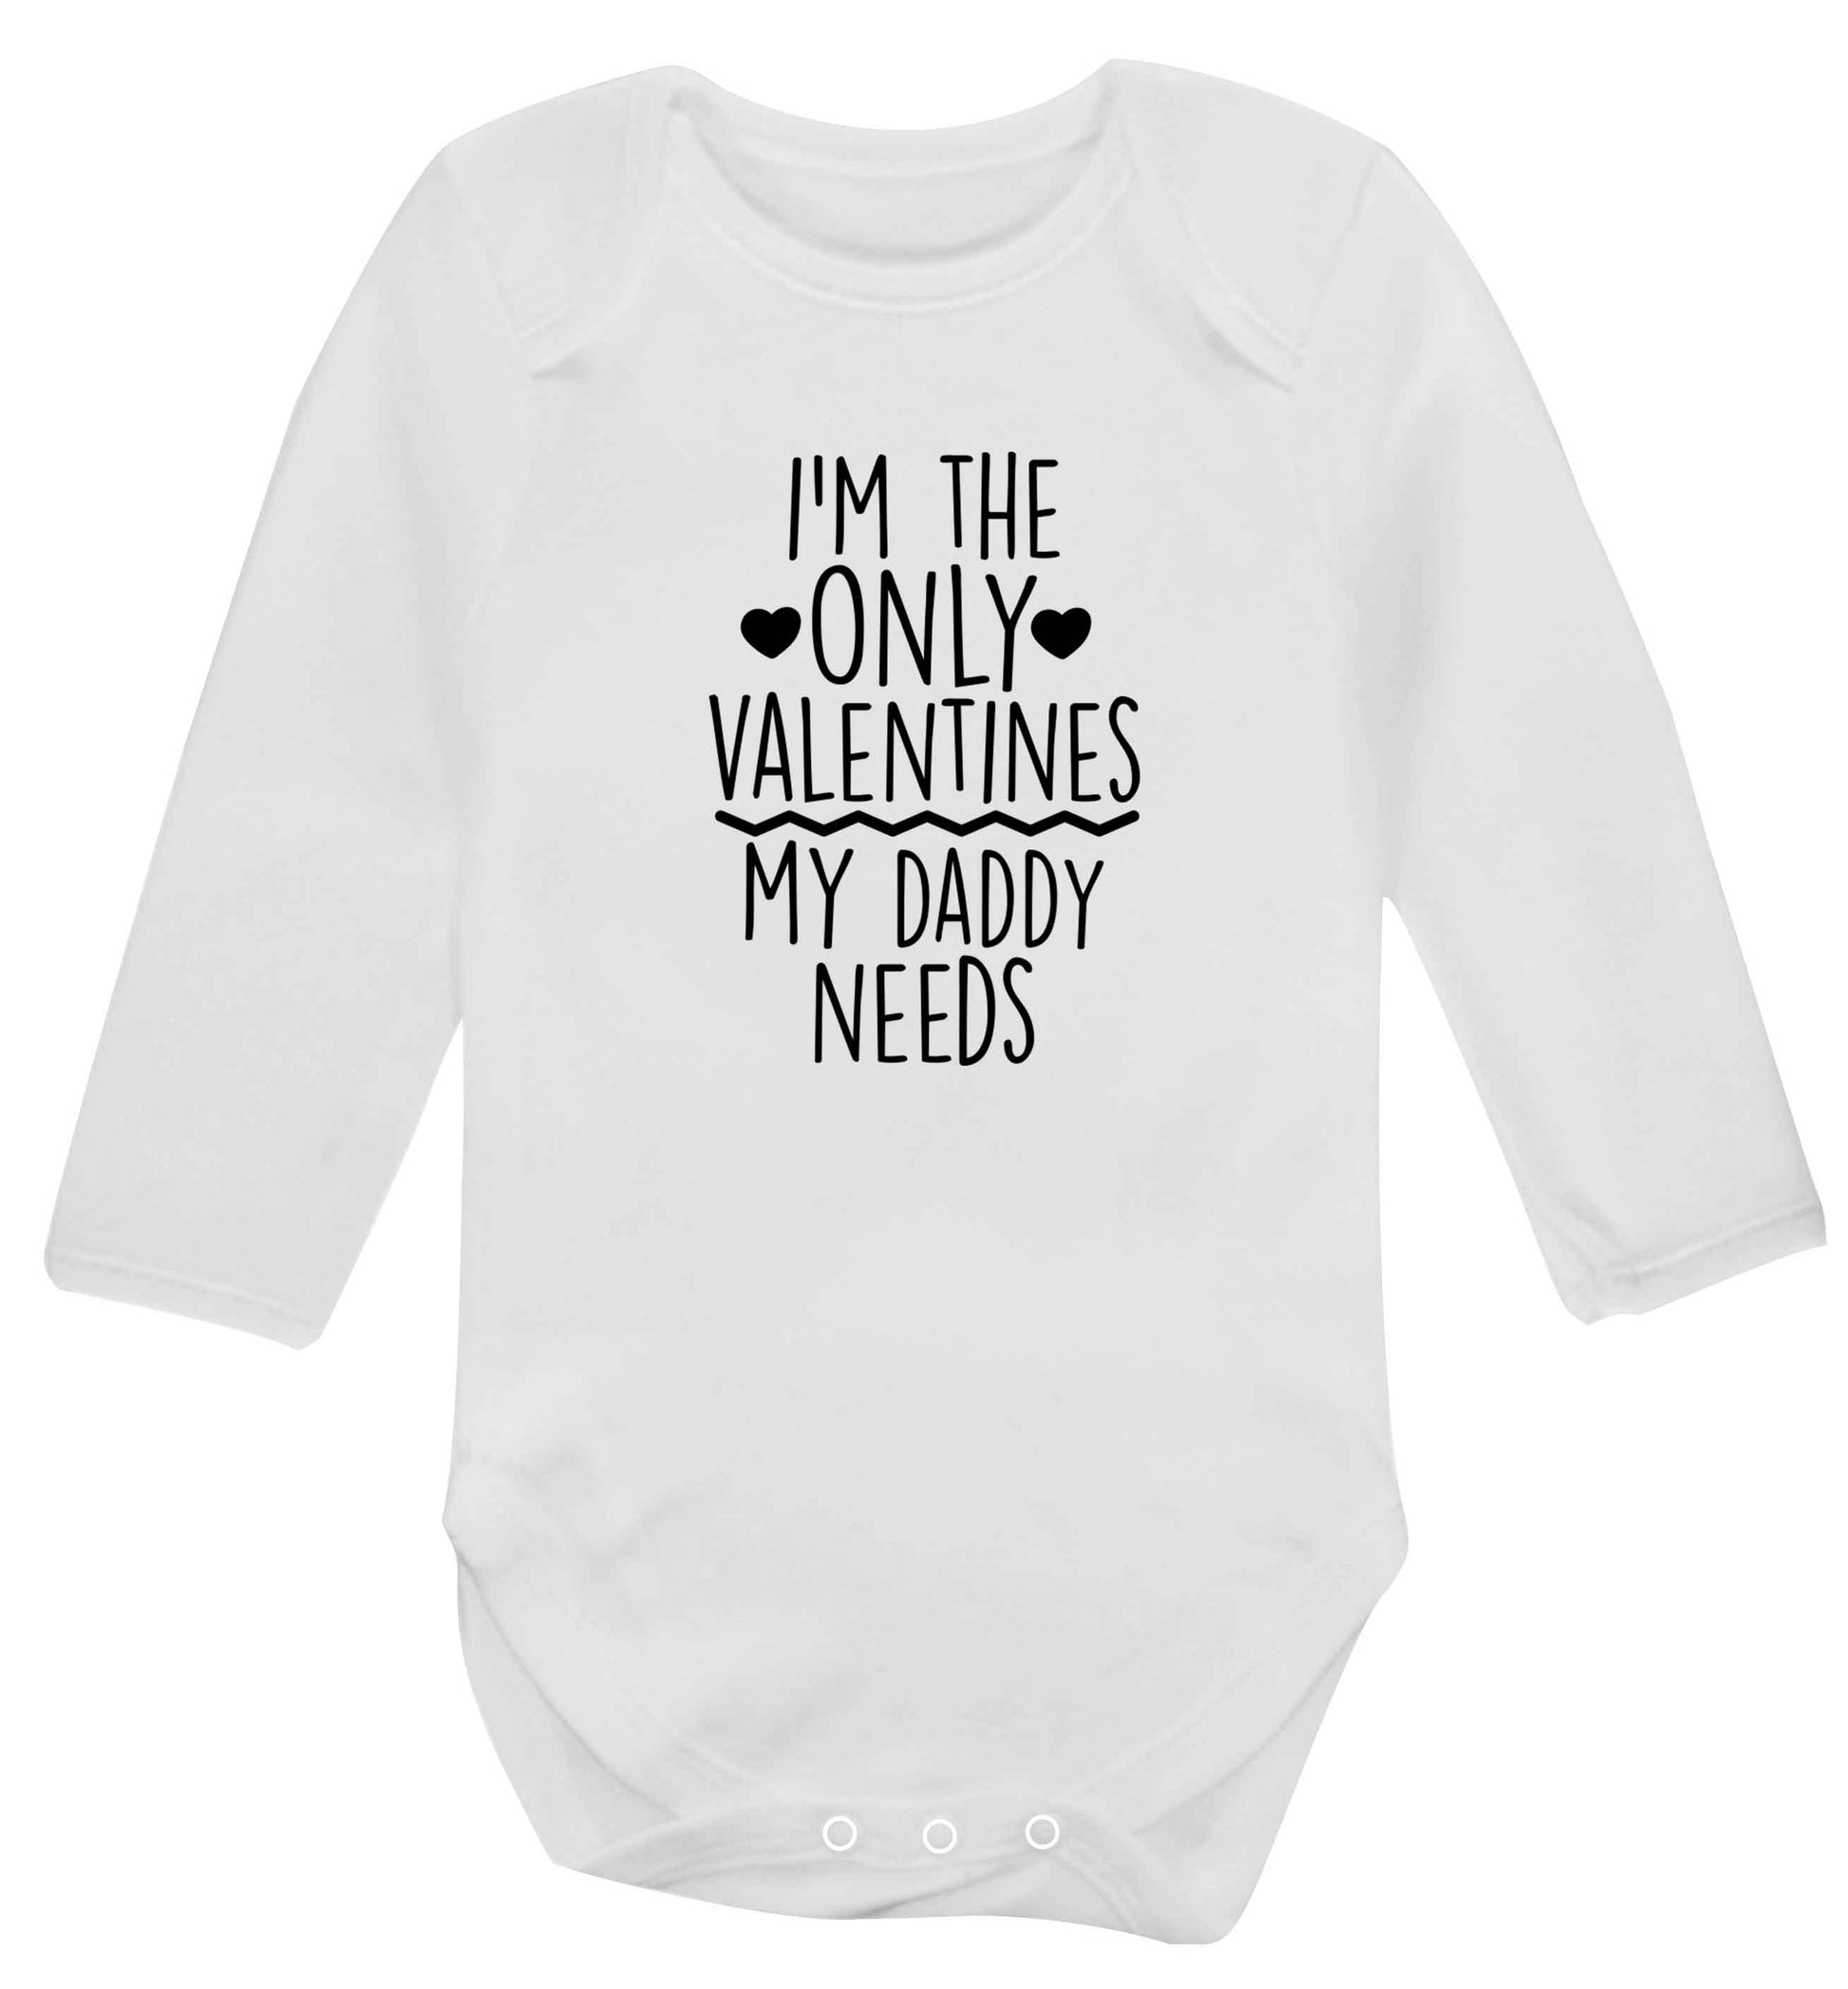 I'm the only valentines my daddy needs baby vest long sleeved white 6-12 months